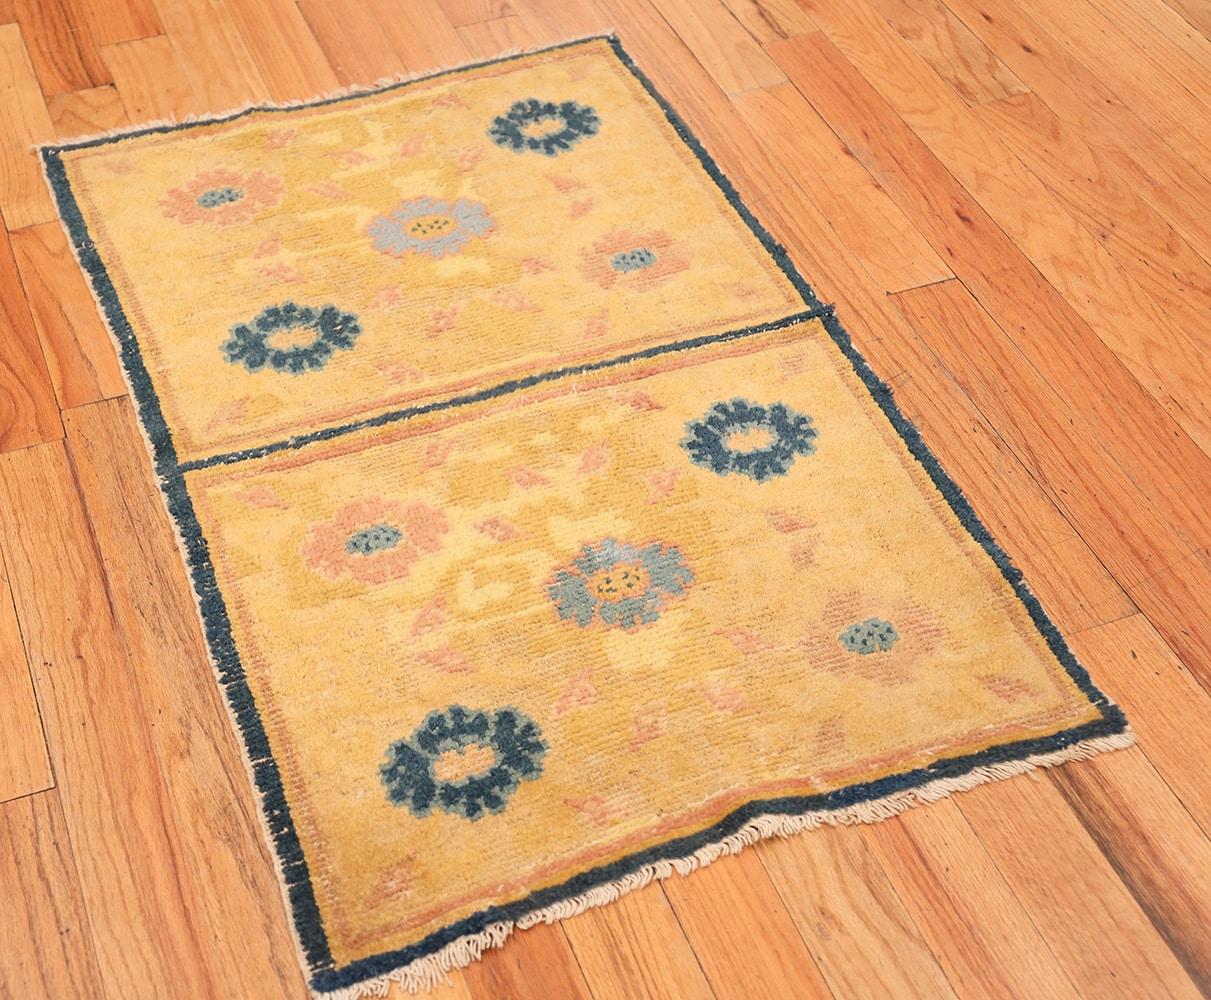 Chinese Chippendale Antique Chinese Rug. Size: 2 ft 3 in x 3 ft 9 in (0.69 m x 1.14 m)